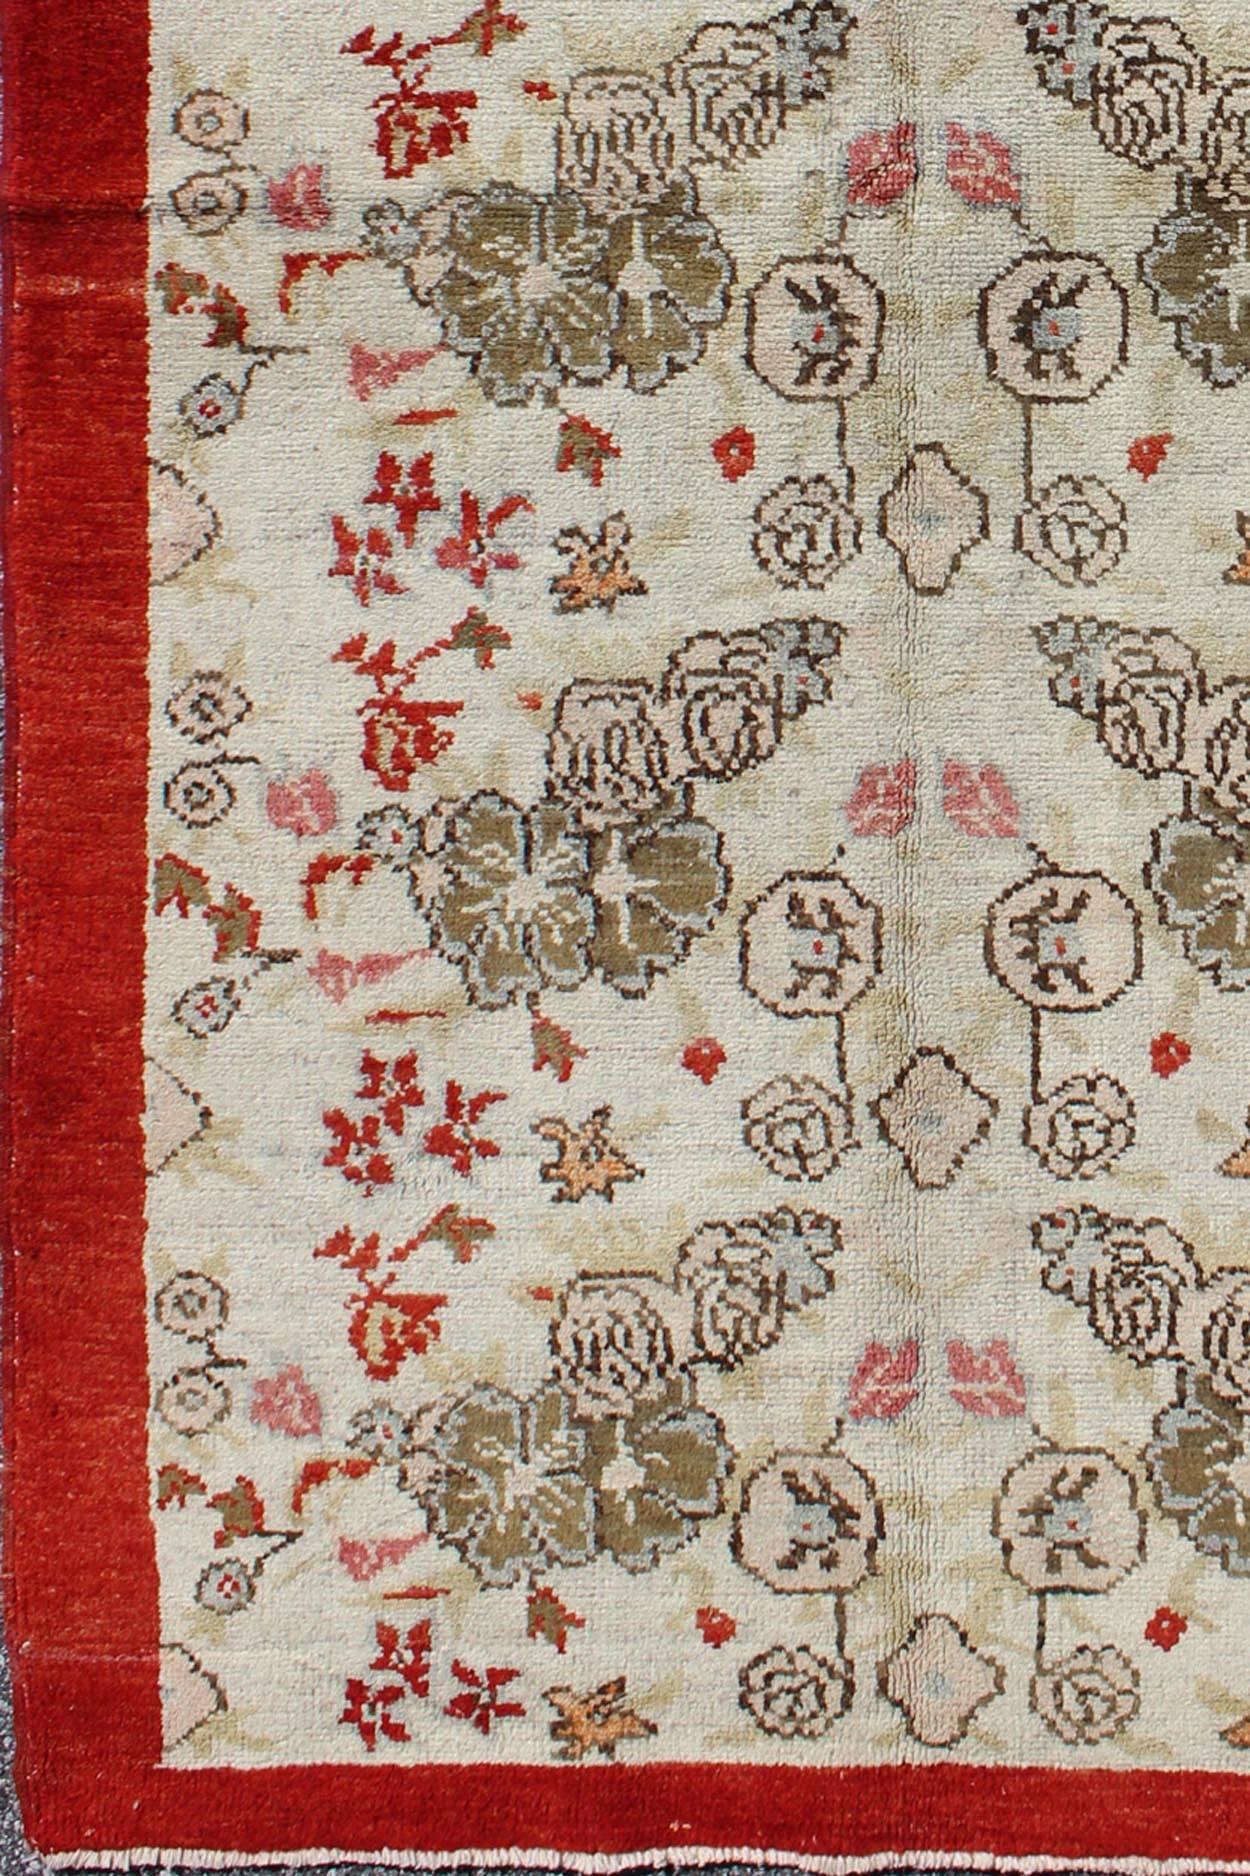 Vintage Turkish Oushak Rug with all over Floral Design in Ivory, Green and Red. Keivan Woven Arts /  Rug / ST-329 Mid-20th Century Vintage Oushak.  
Measures: 3' x 6'2
This Oushak contains tones of red, taupe, beige and green, which are highlighted